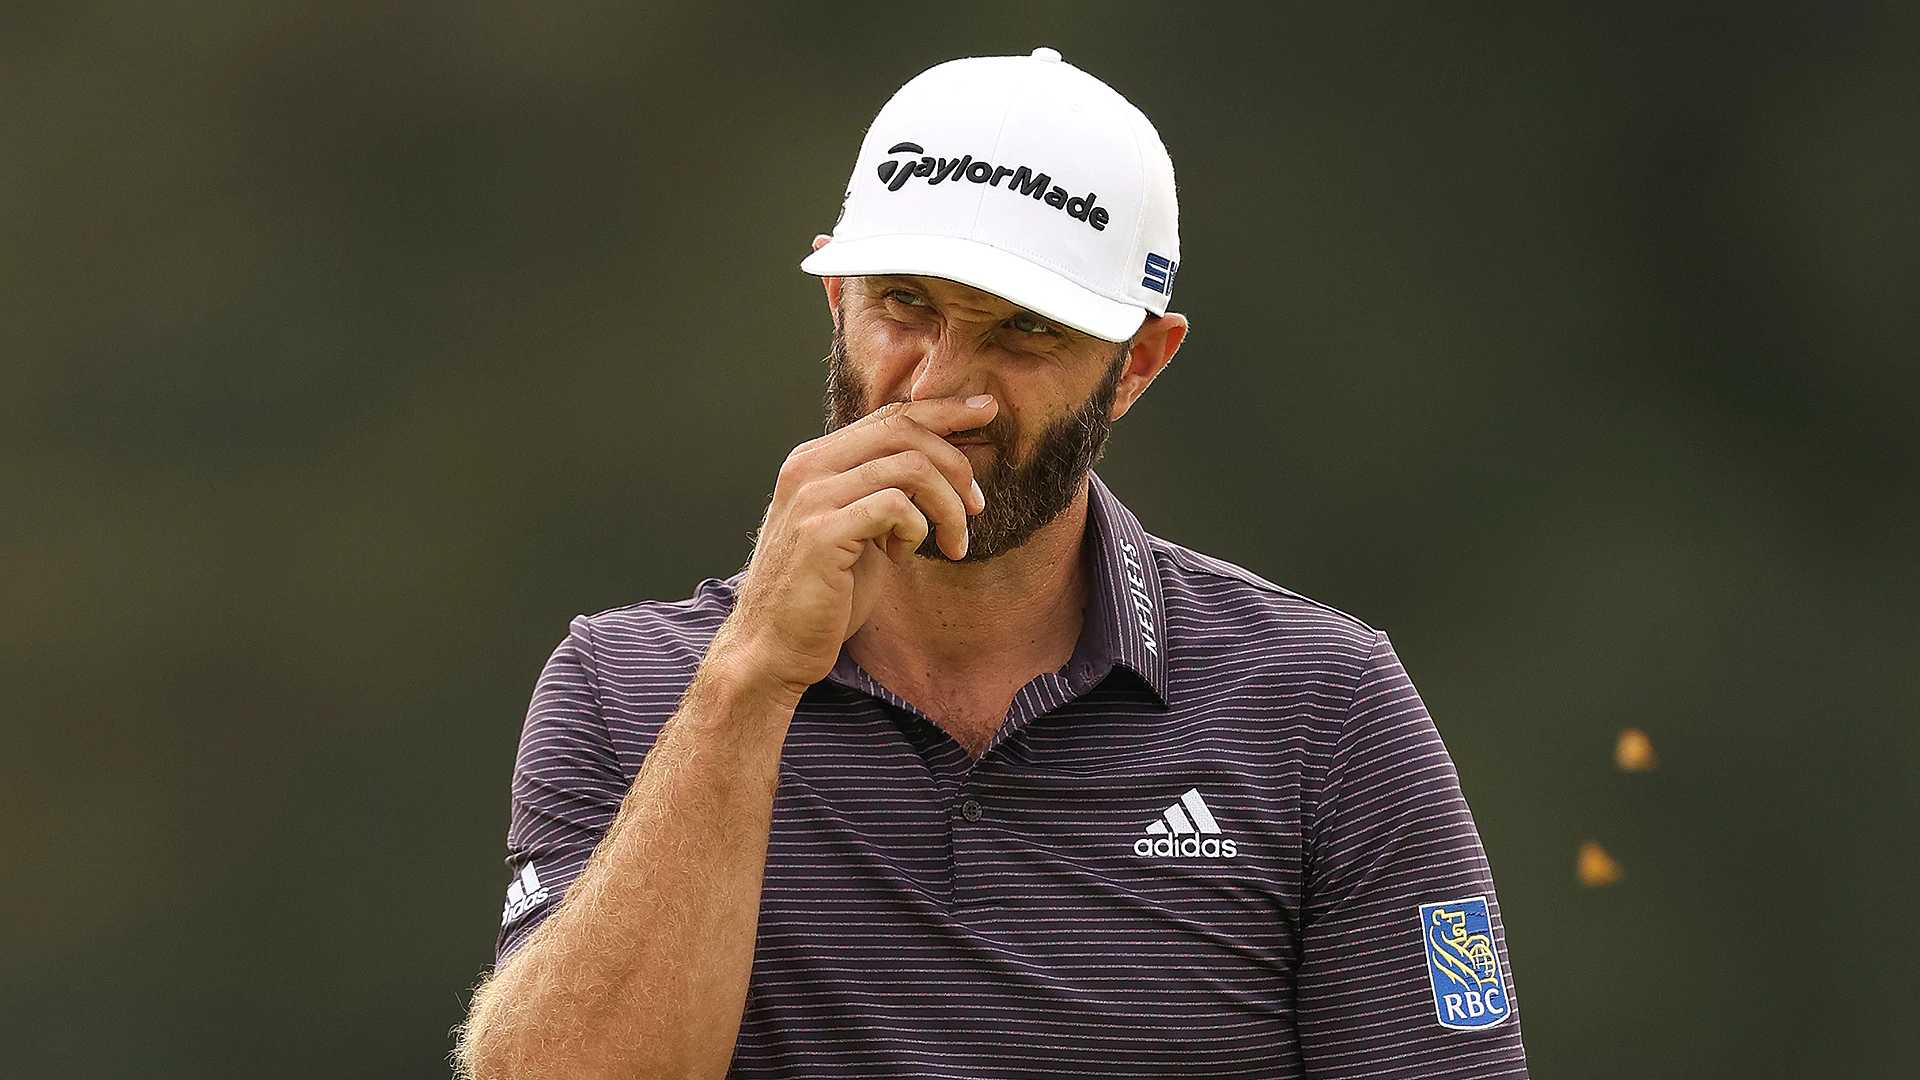 Dustin Johnson left behind, already eight shots back after opening 73